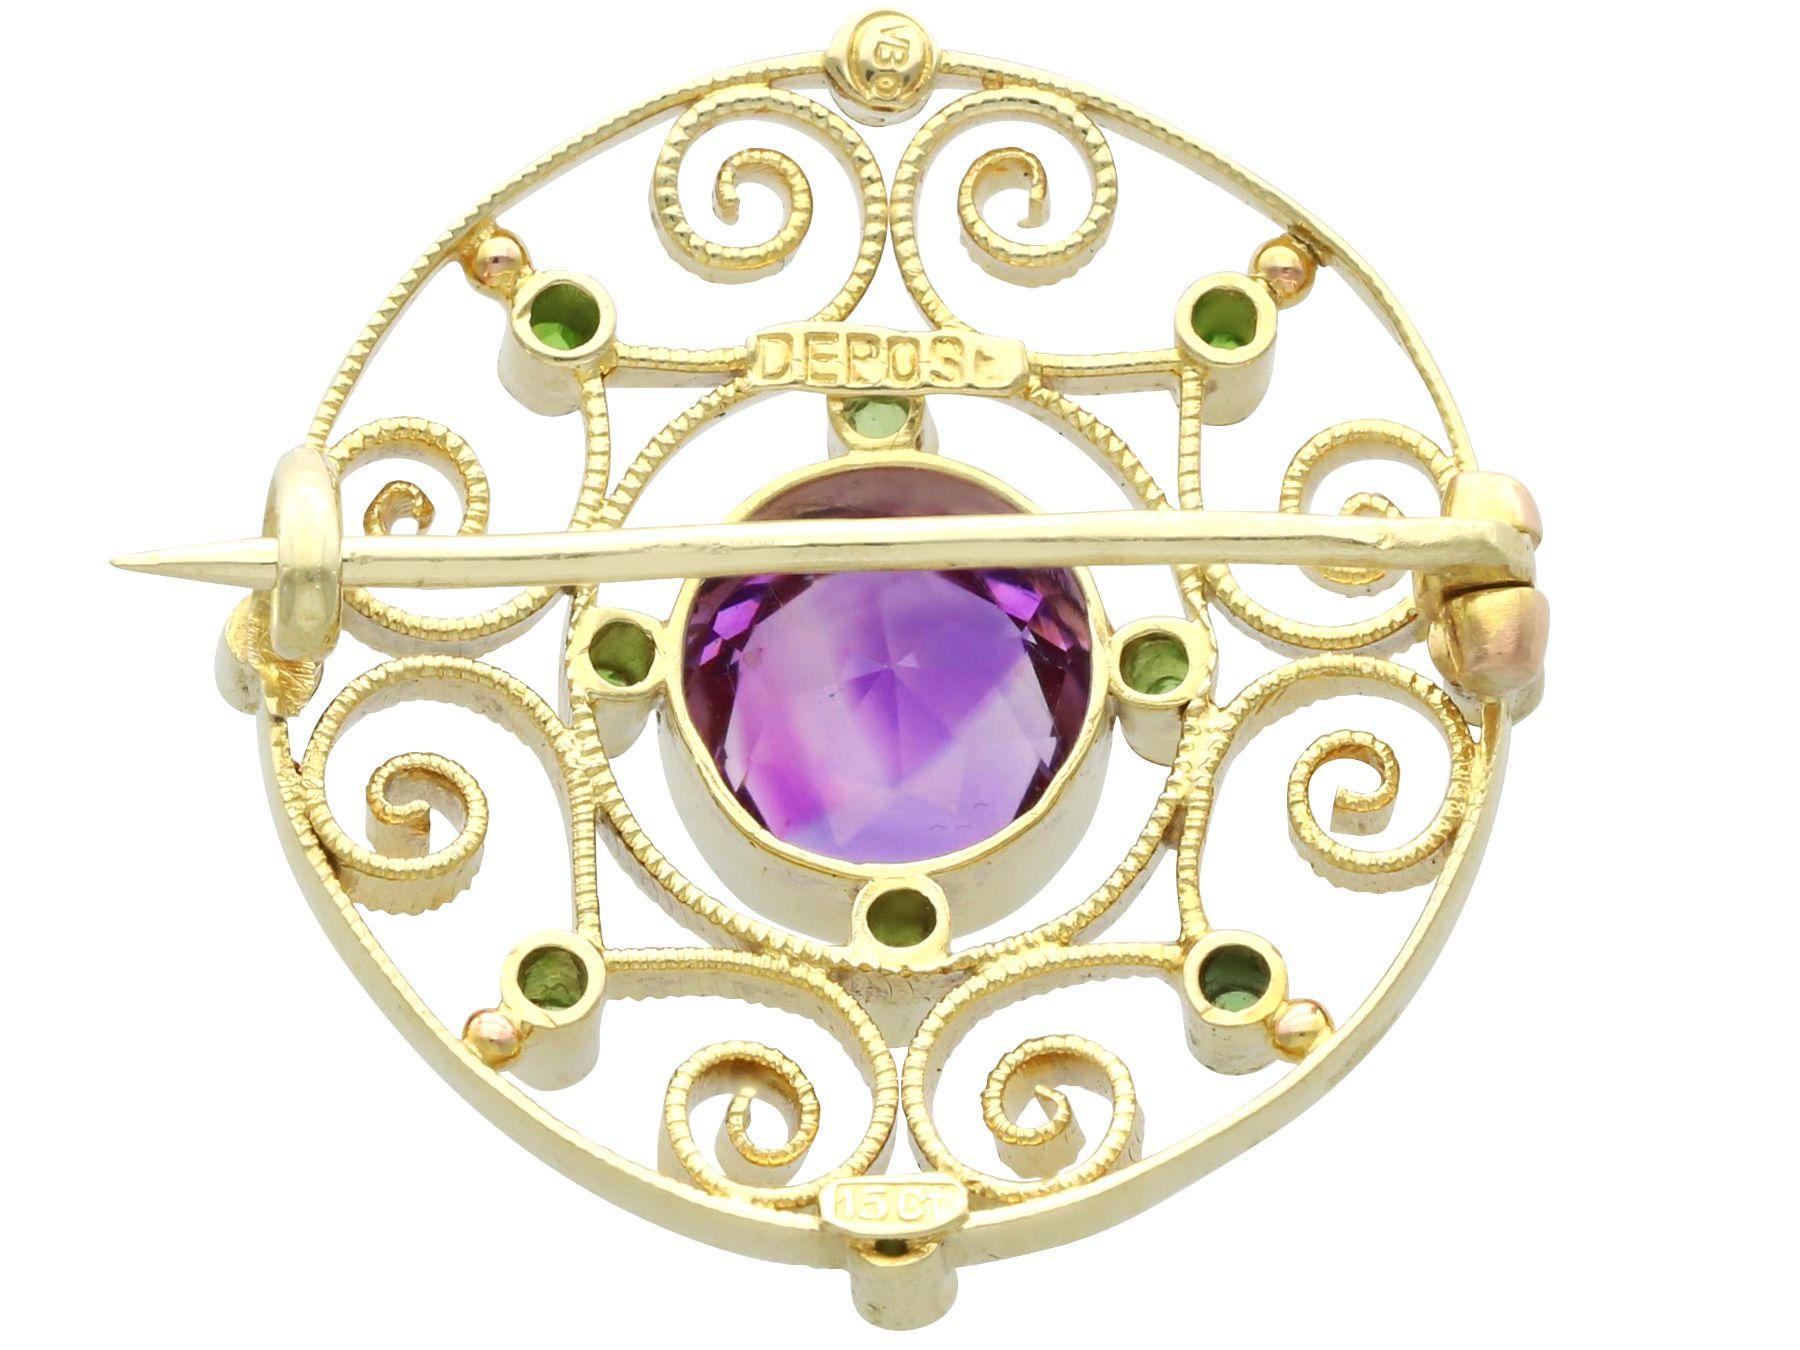 Antique 1.69 Carat Amethyst and 0.22 Carat Peridot Yellow Gold Brooch In Excellent Condition For Sale In Jesmond, Newcastle Upon Tyne